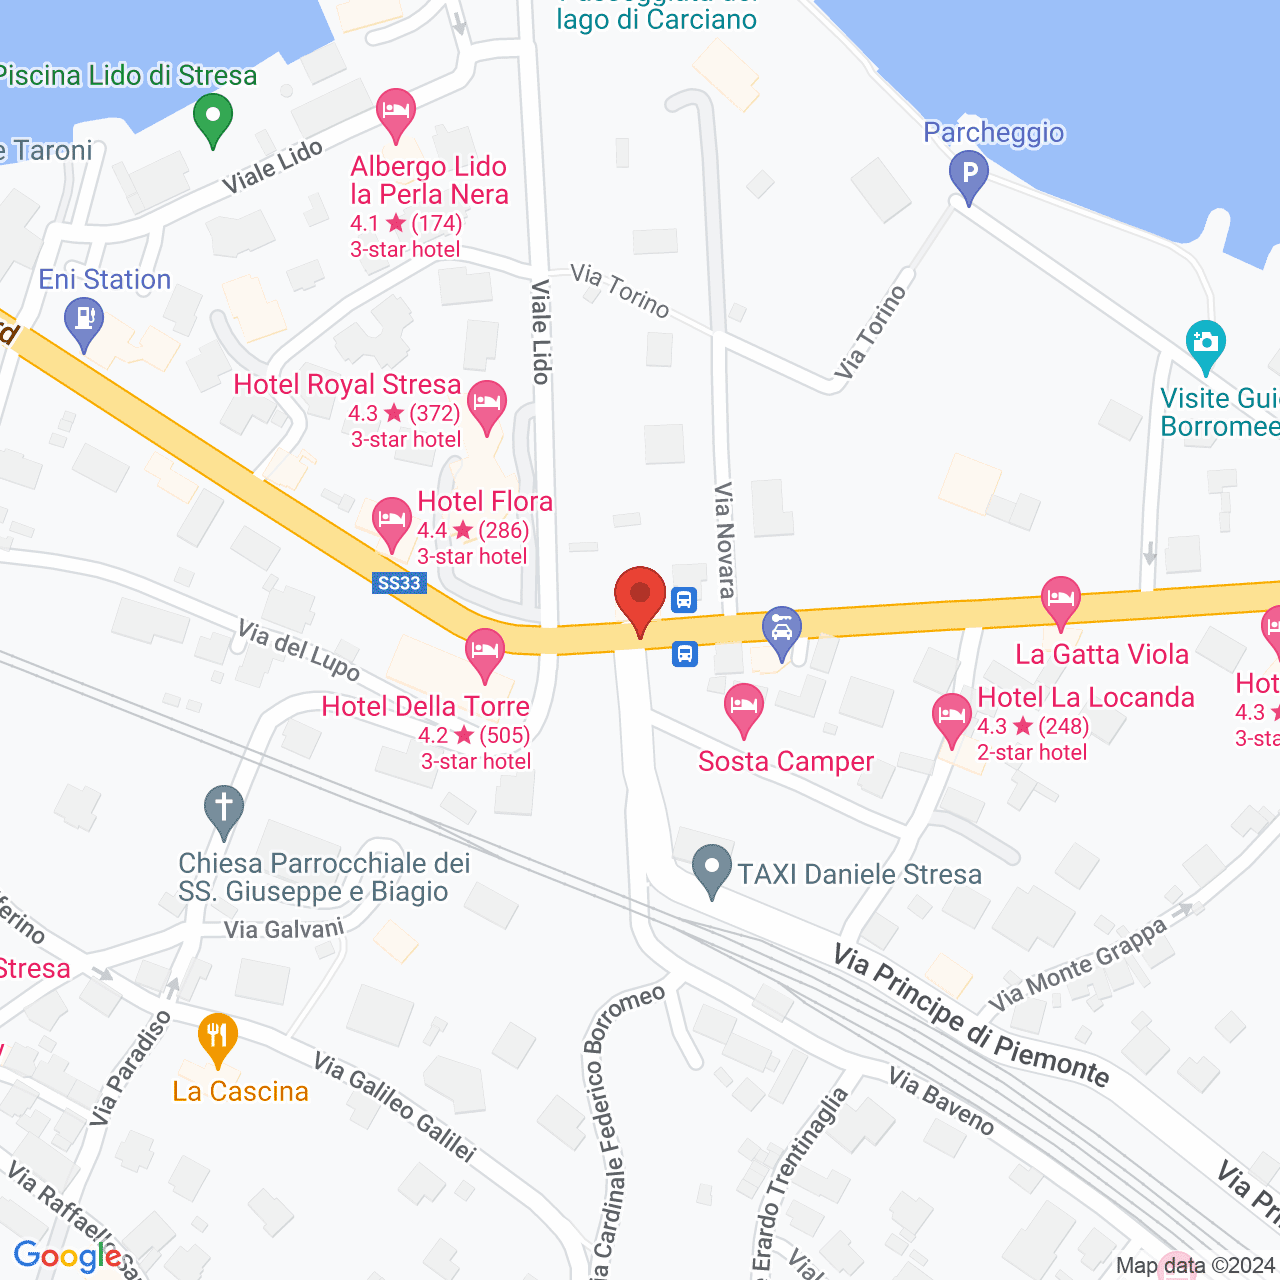 https://maps.googleapis.com/maps/api/staticmap?zoom=10&maptype=hybrid&scale=4&center=45.8882031,8.5258667&markers=color:red%7C%7C45.8882031,8.5258667&size=1000x1000&key=AIzaSyAQg6Liu52-a7wn17F9B-5c4QmJ9kTO3Mo